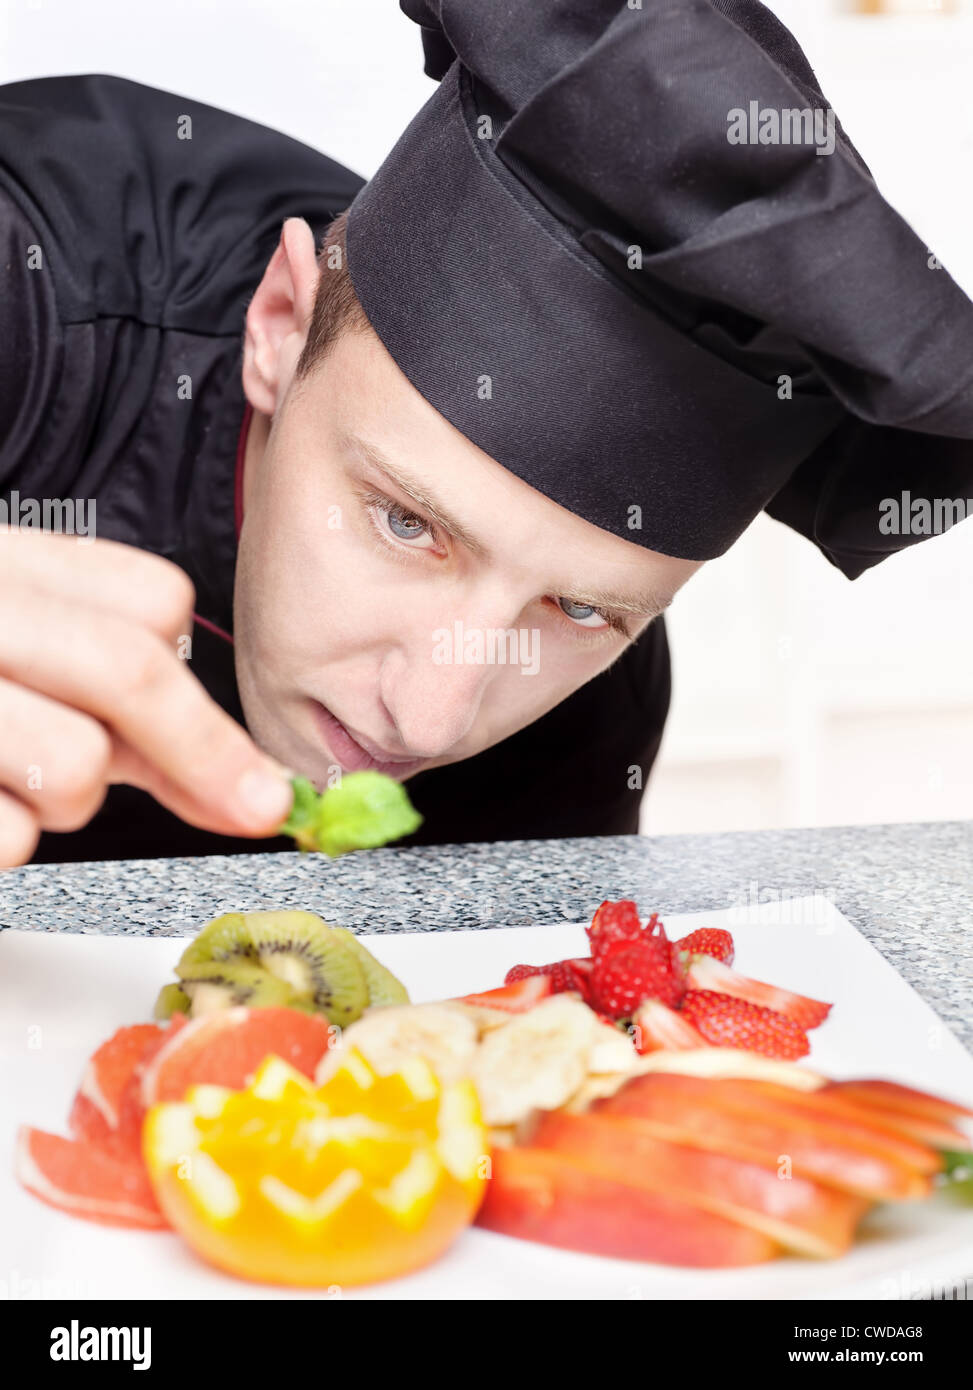 chef in black uniform decorating delicious fruit plate Stock Photo